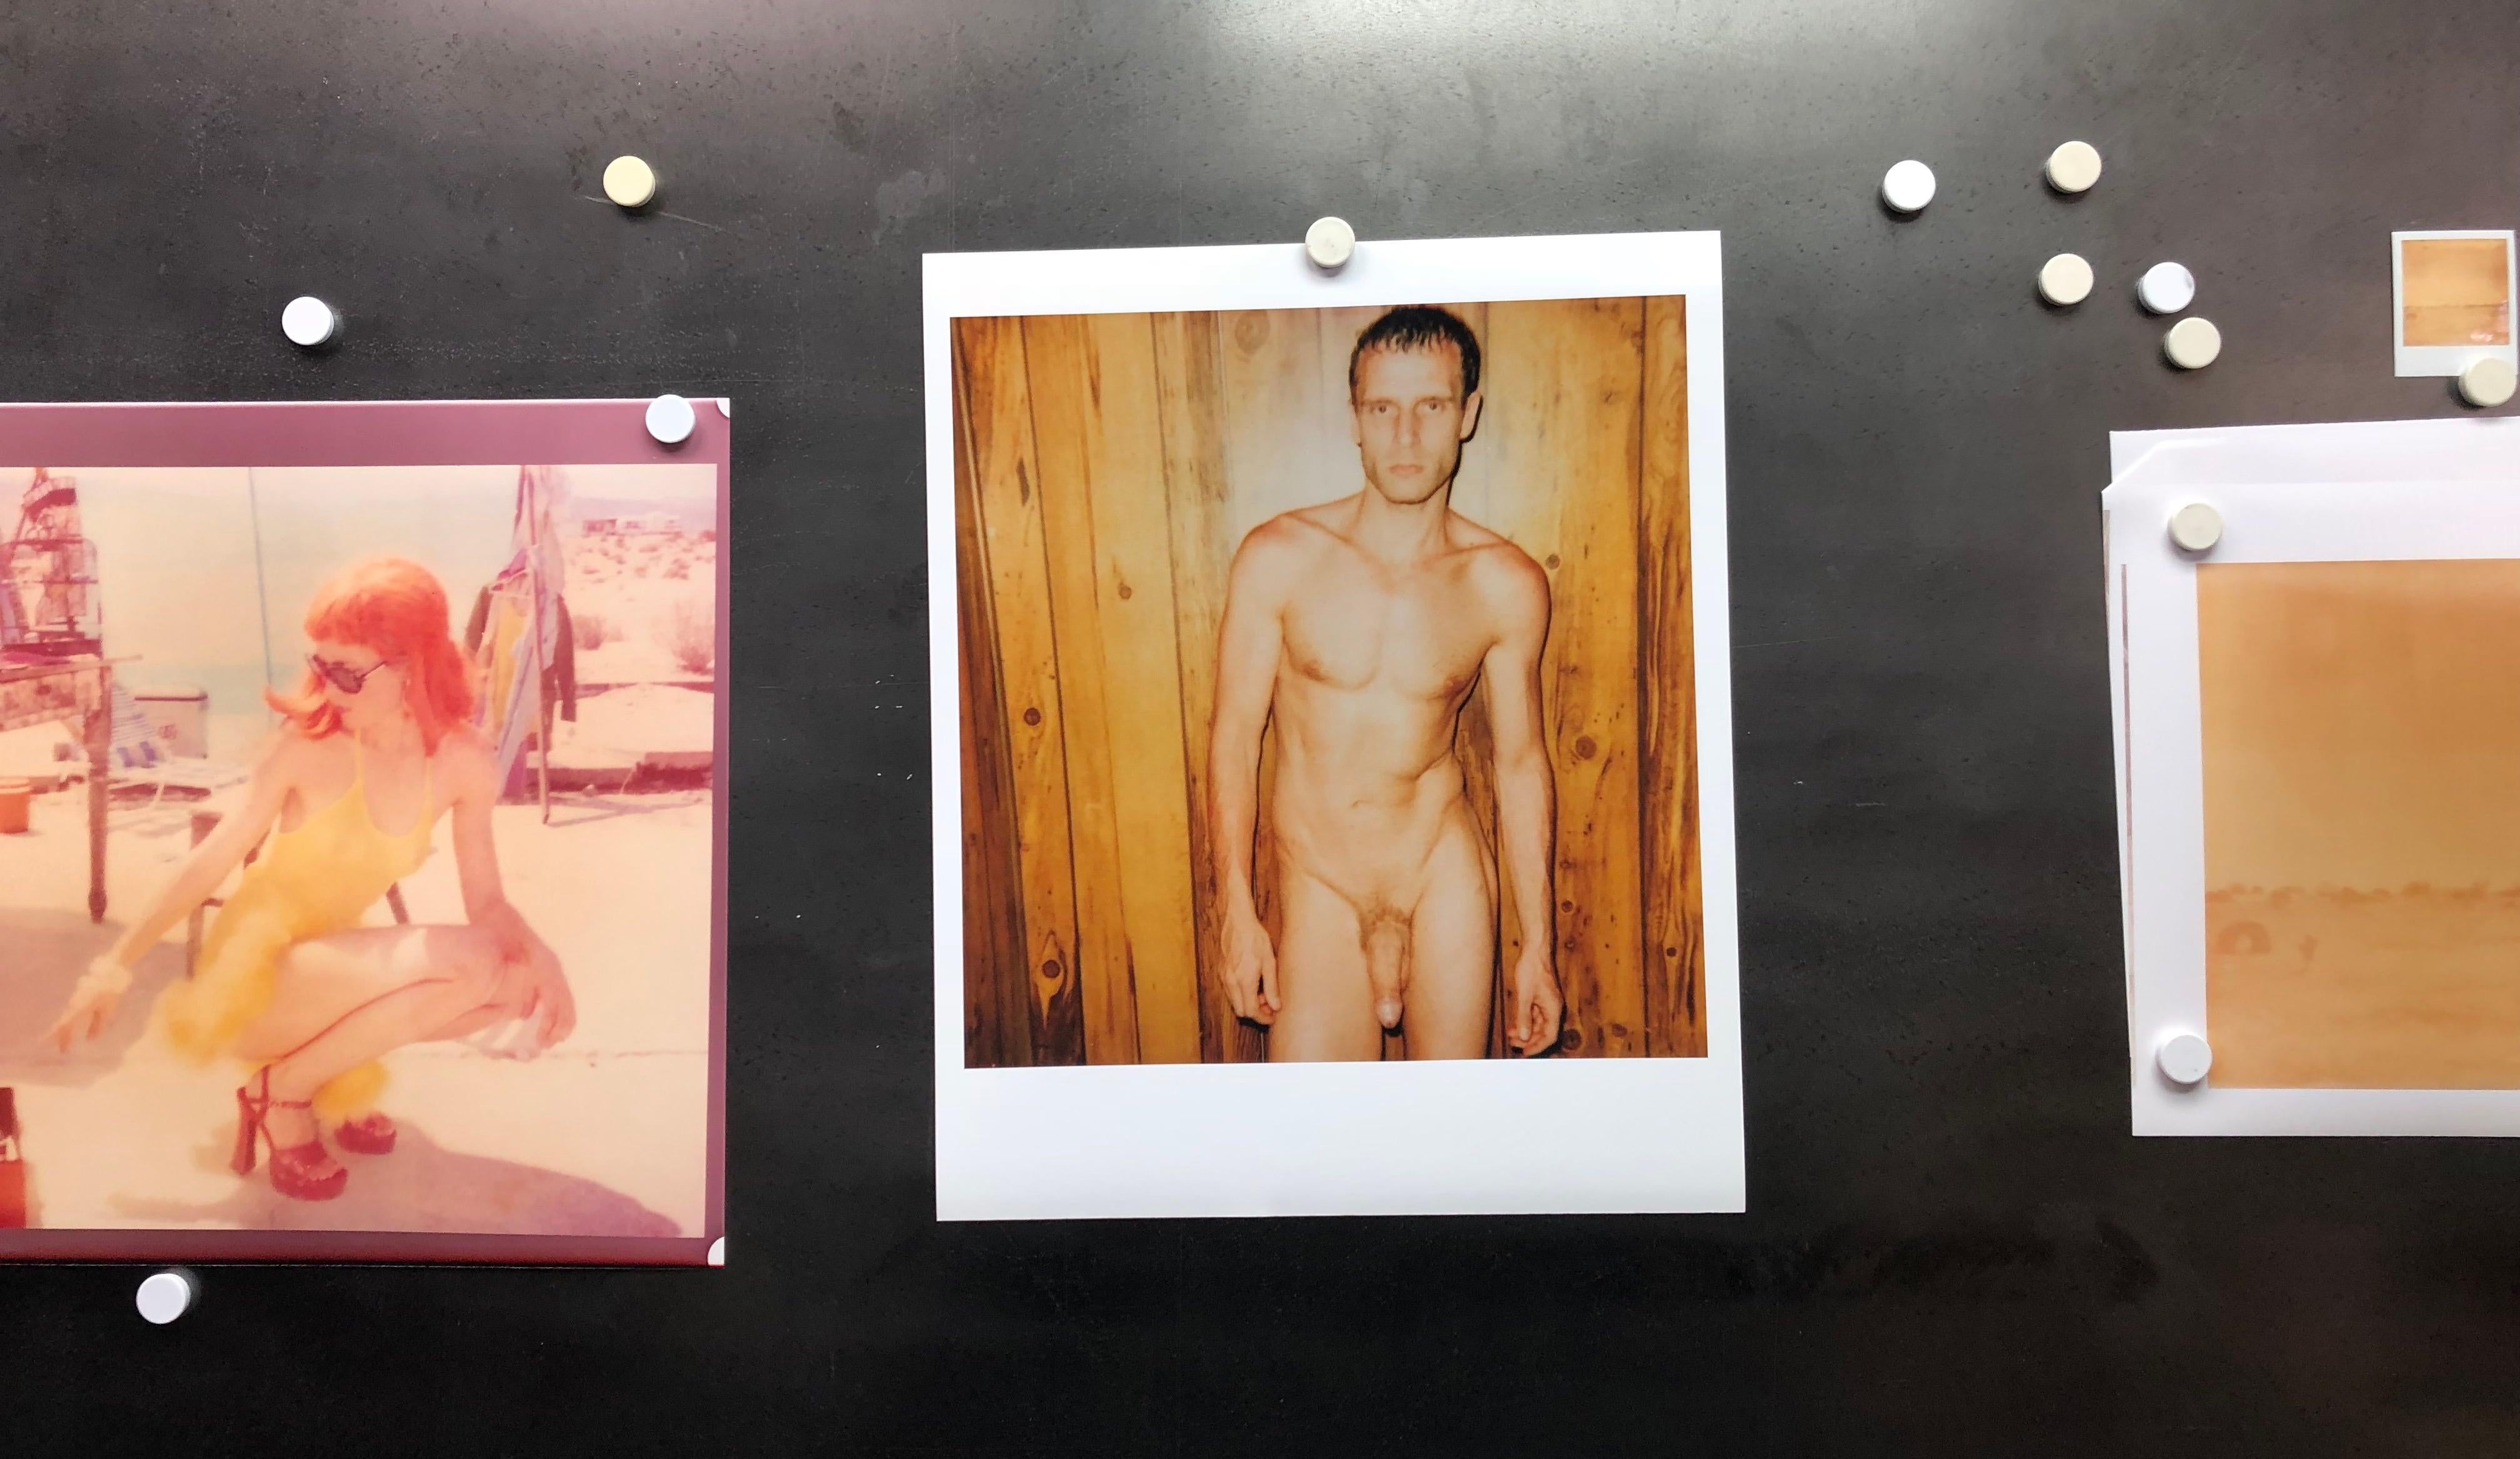 Male Nude (29 Palms, CA), 1999, 58x56cm,
Edition 6/10, analog C-Print, hand-printed by the artist, based on a Polaroid
Certificate and Signature label
artist Inventory # 293.06
not mounted


THE GREATER THE EMPTINESS THE GRANDER THE ART – Stefan